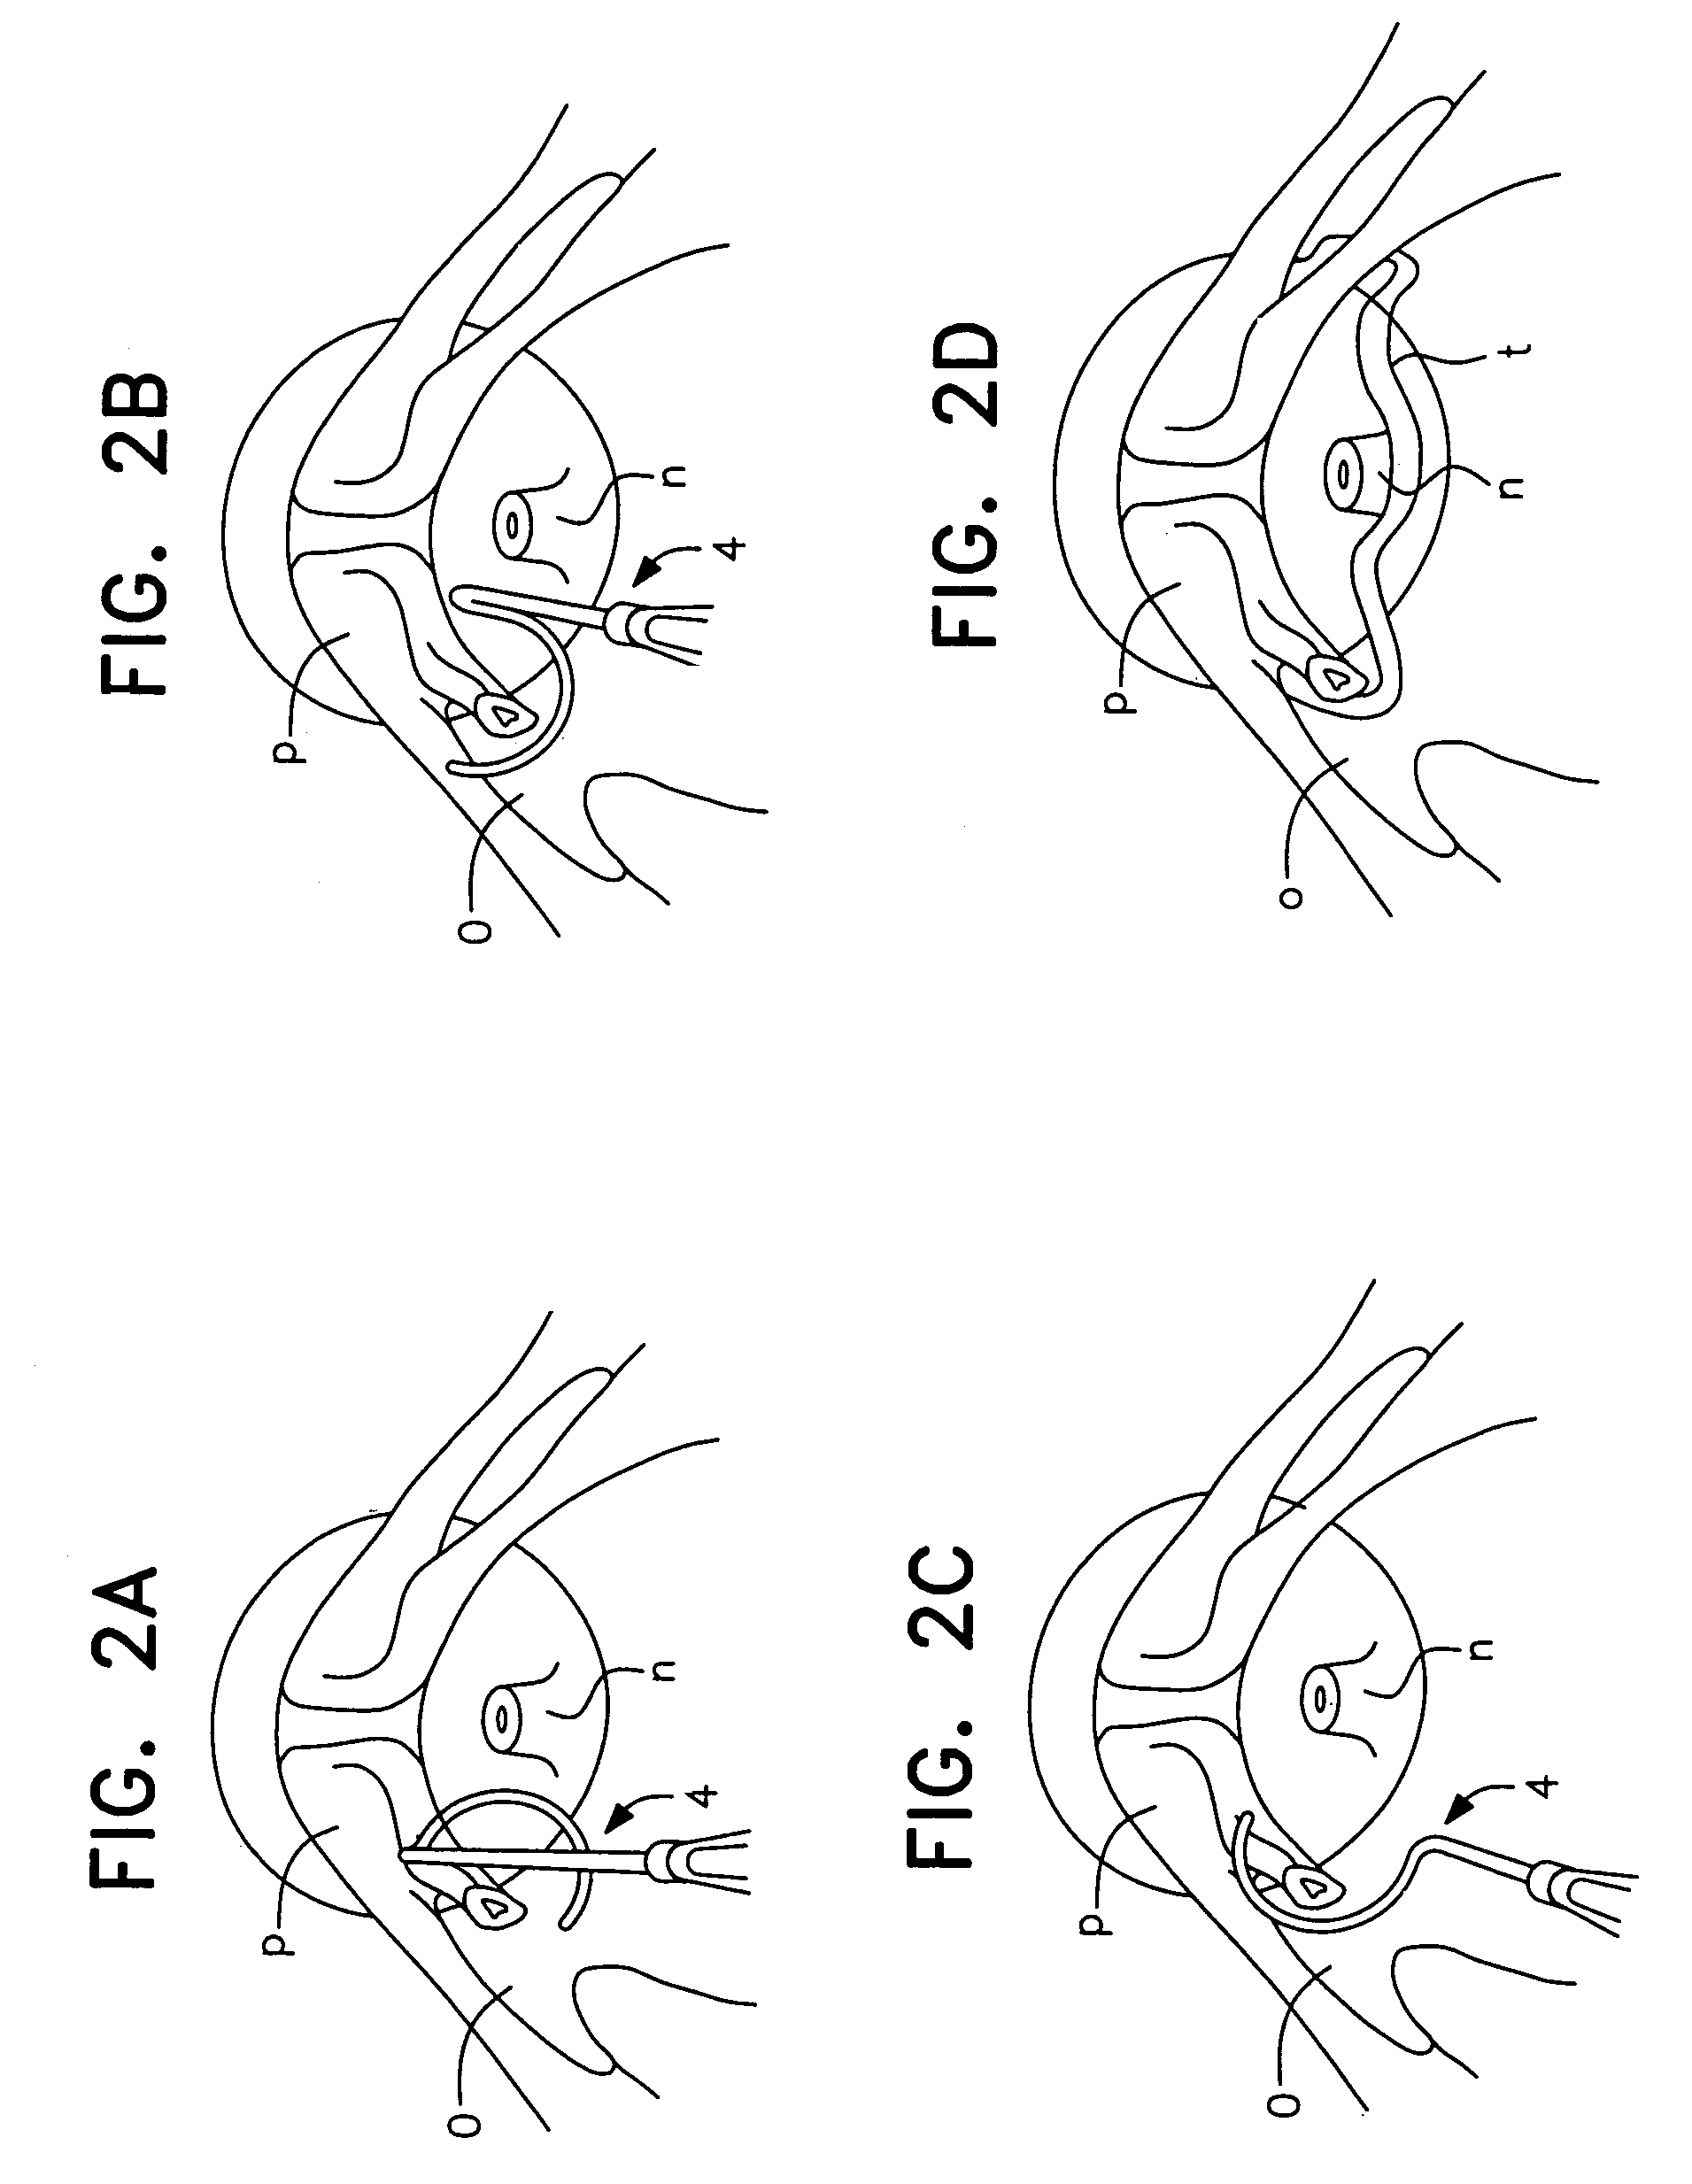 Surgical procedure for the treatment of female urinary incontinence: tension-free inside-out transobturator urethral suspension